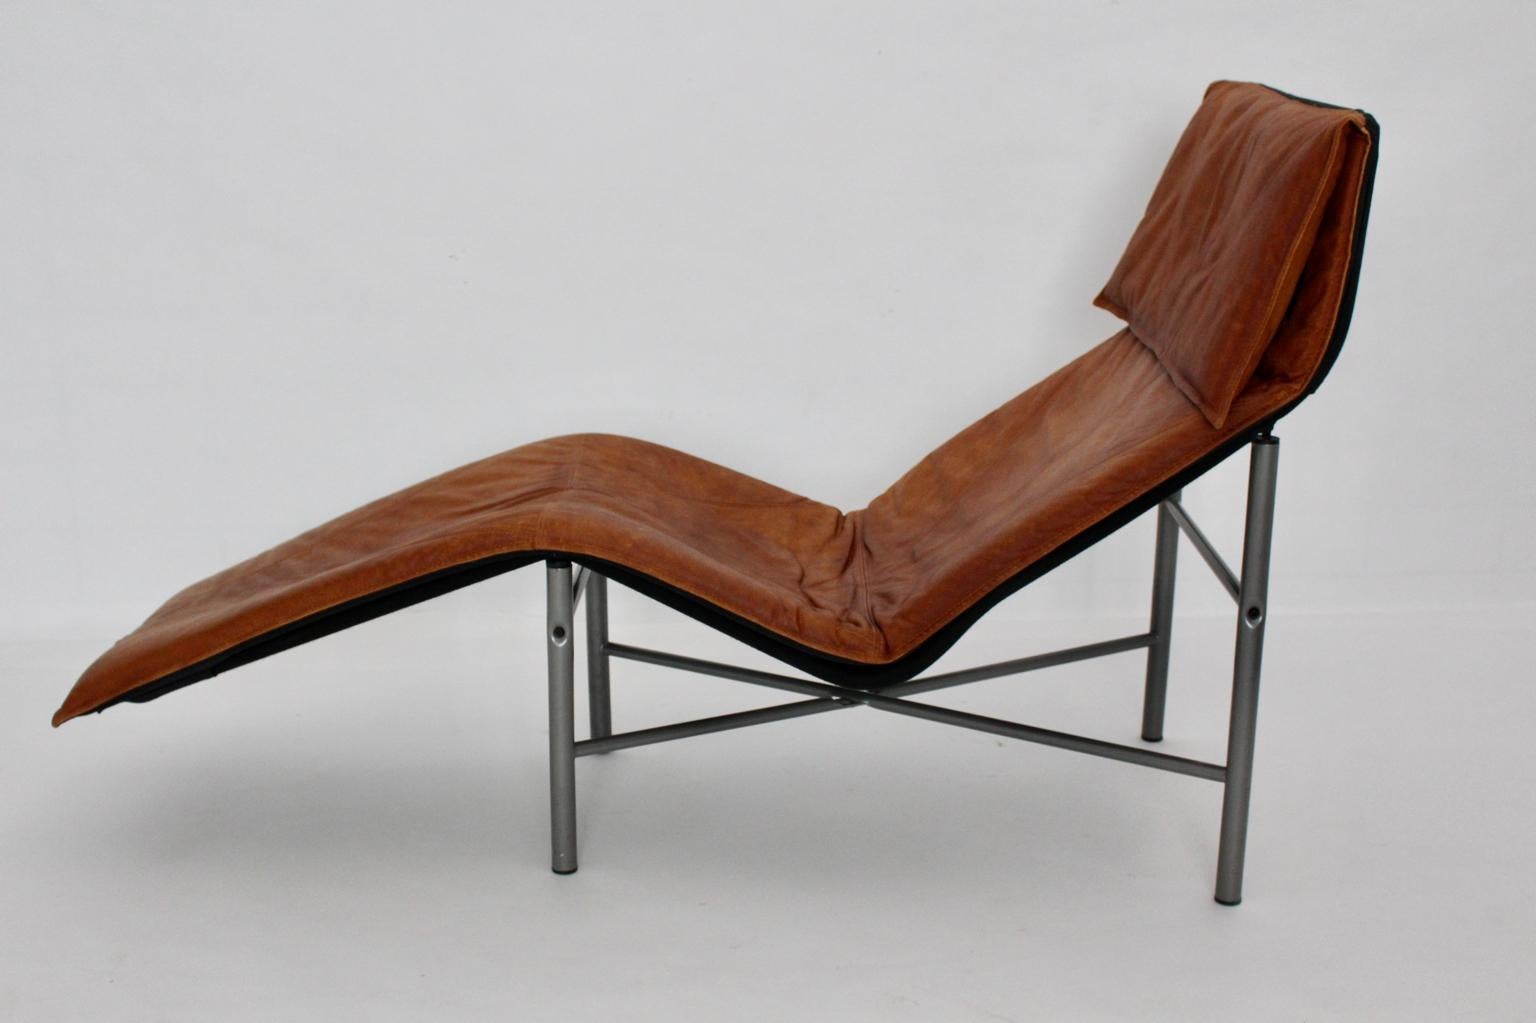 Late 20th Century Leather Vintage Chaise Longue by Tord Bjorklund Sweden, 1970s